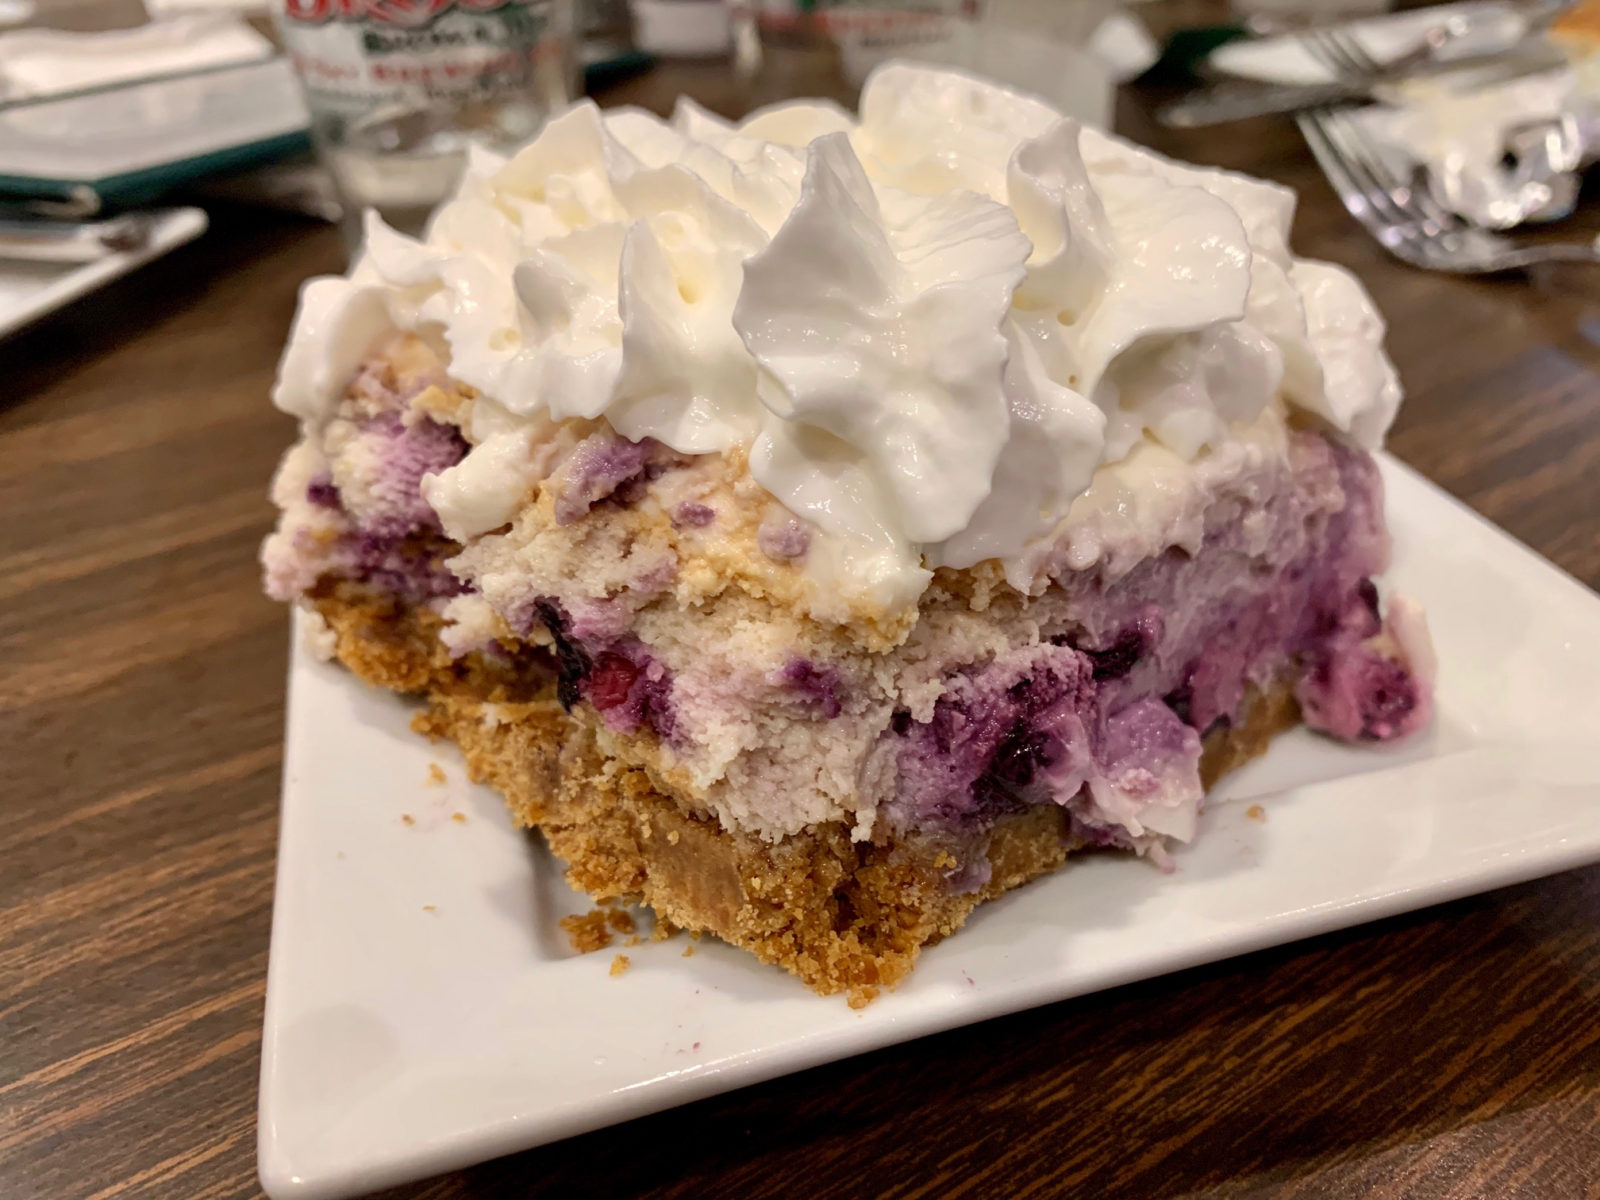 West Yellowstone food tour Bullwinkle Saloon huckleberry cheesecake